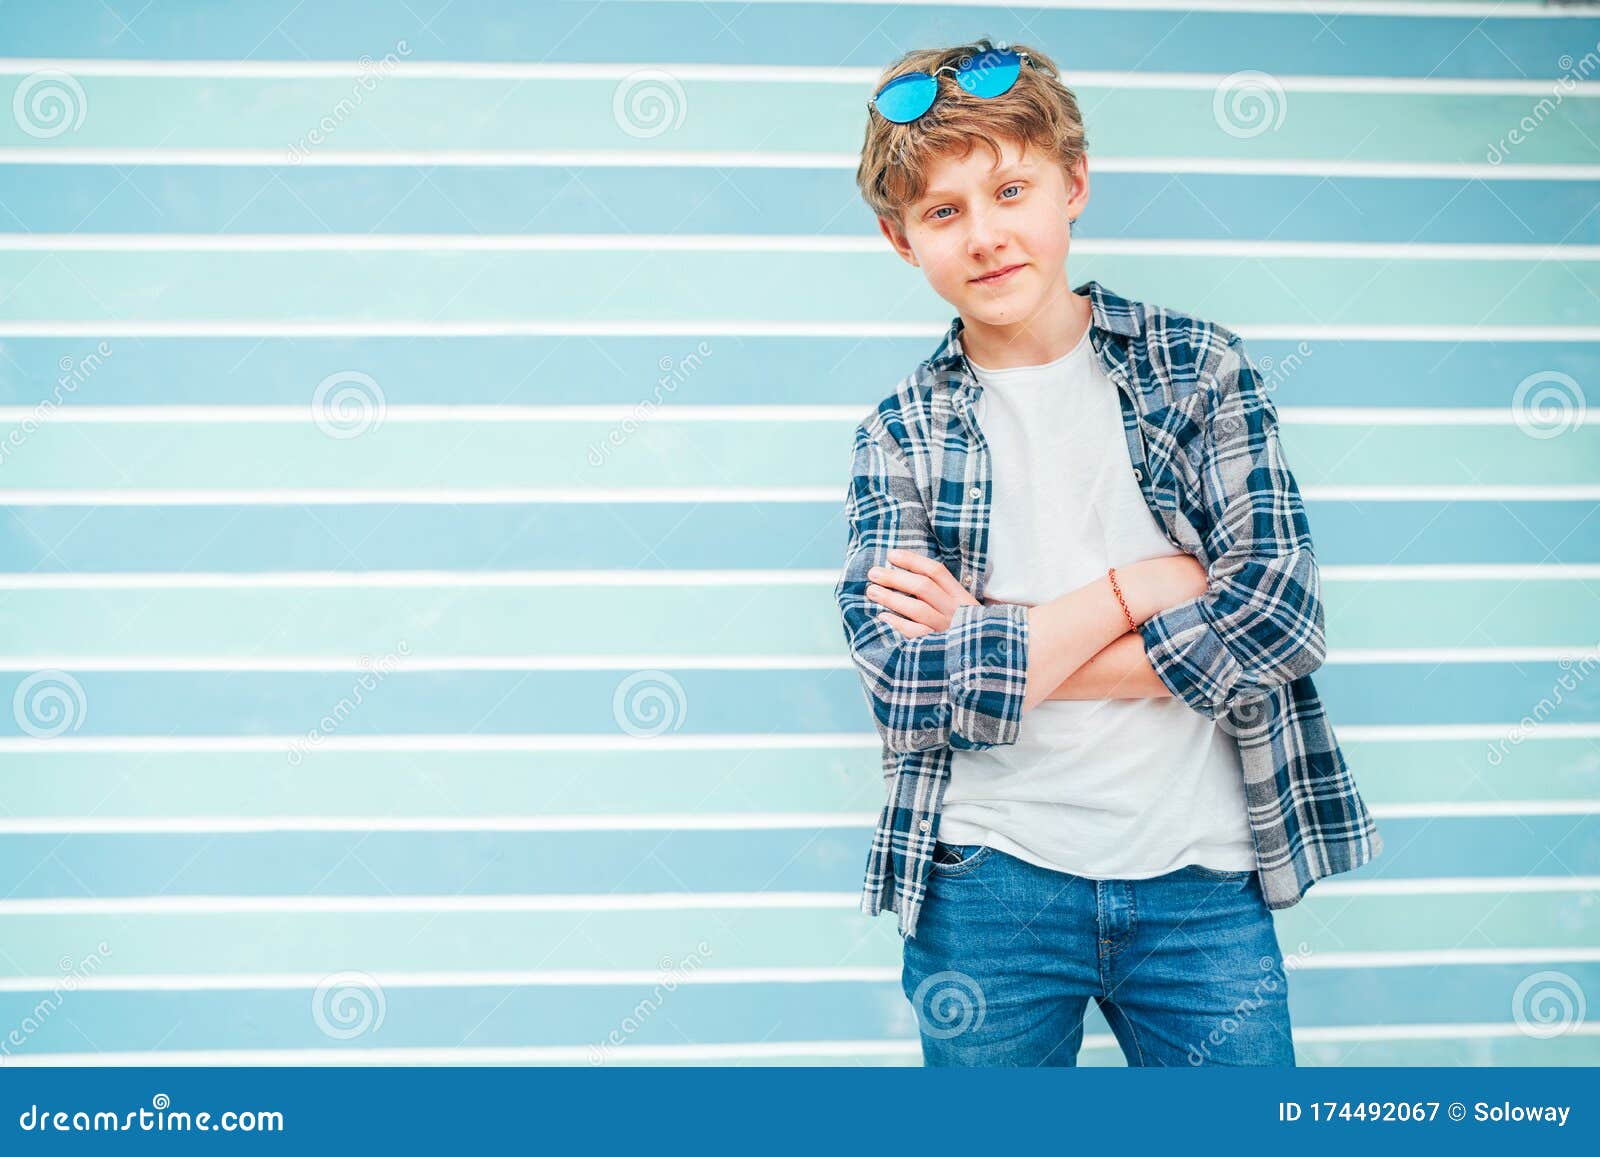 Fashion Portrait of Caucasian Blue-eyed Blonde Hair 12 Year Old Teenager  Boy Dressed T-shirt and Checkered Shirt with Sunglasses Stock Image - Image  of blueeyed, model: 174492067